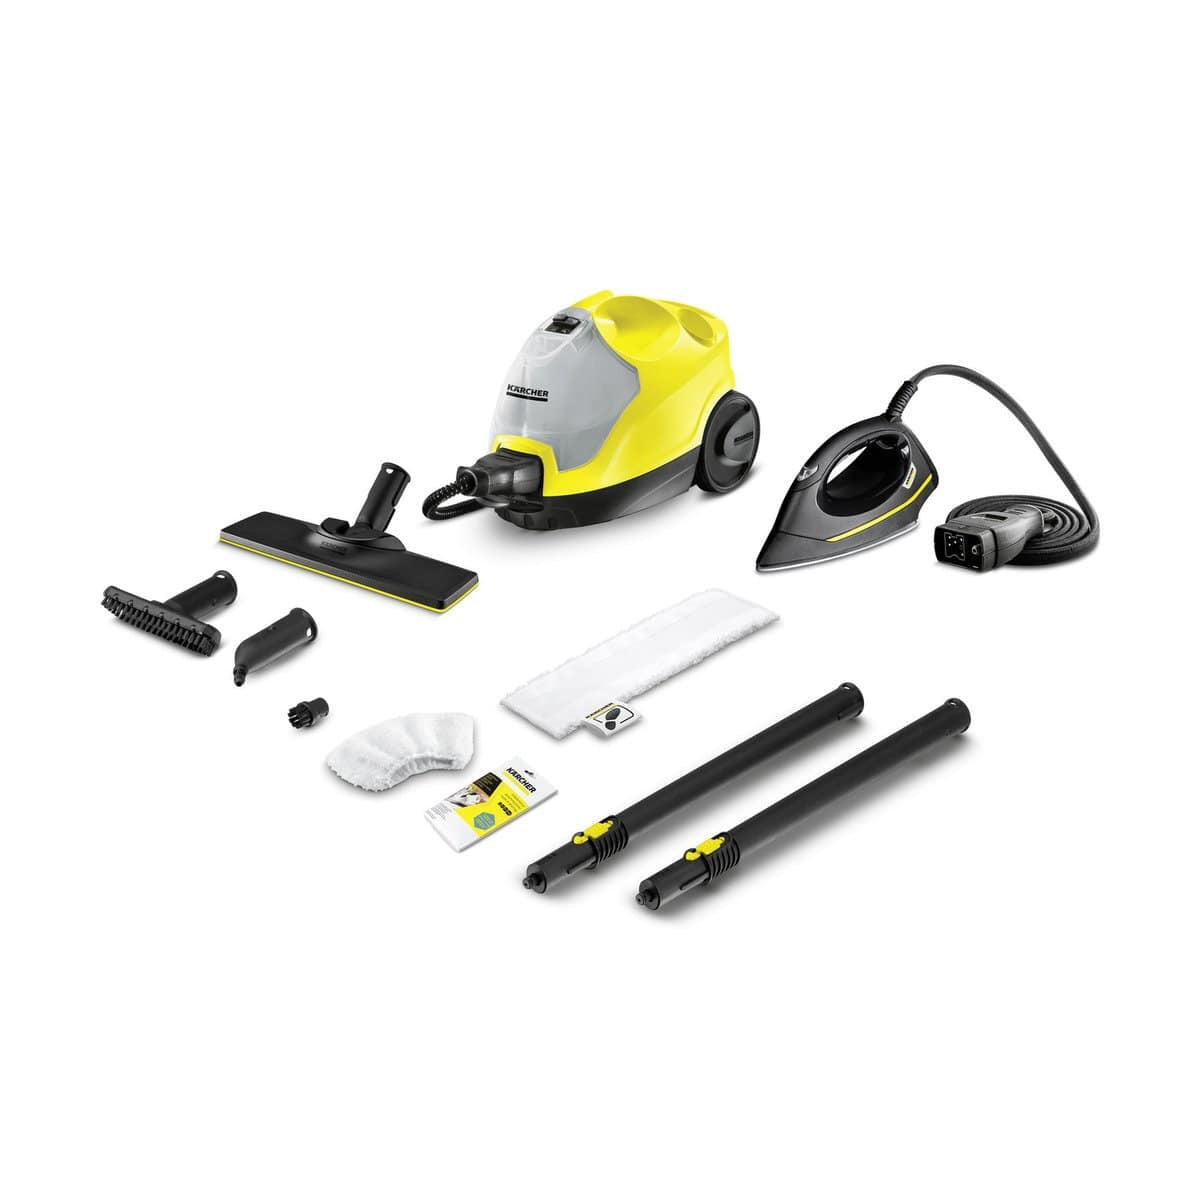 Karcher Steam Cleaner - SC 4 EasyFix Iron | Supply Master | Accra, Ghana Tools Building Steel Engineering Hardware tool